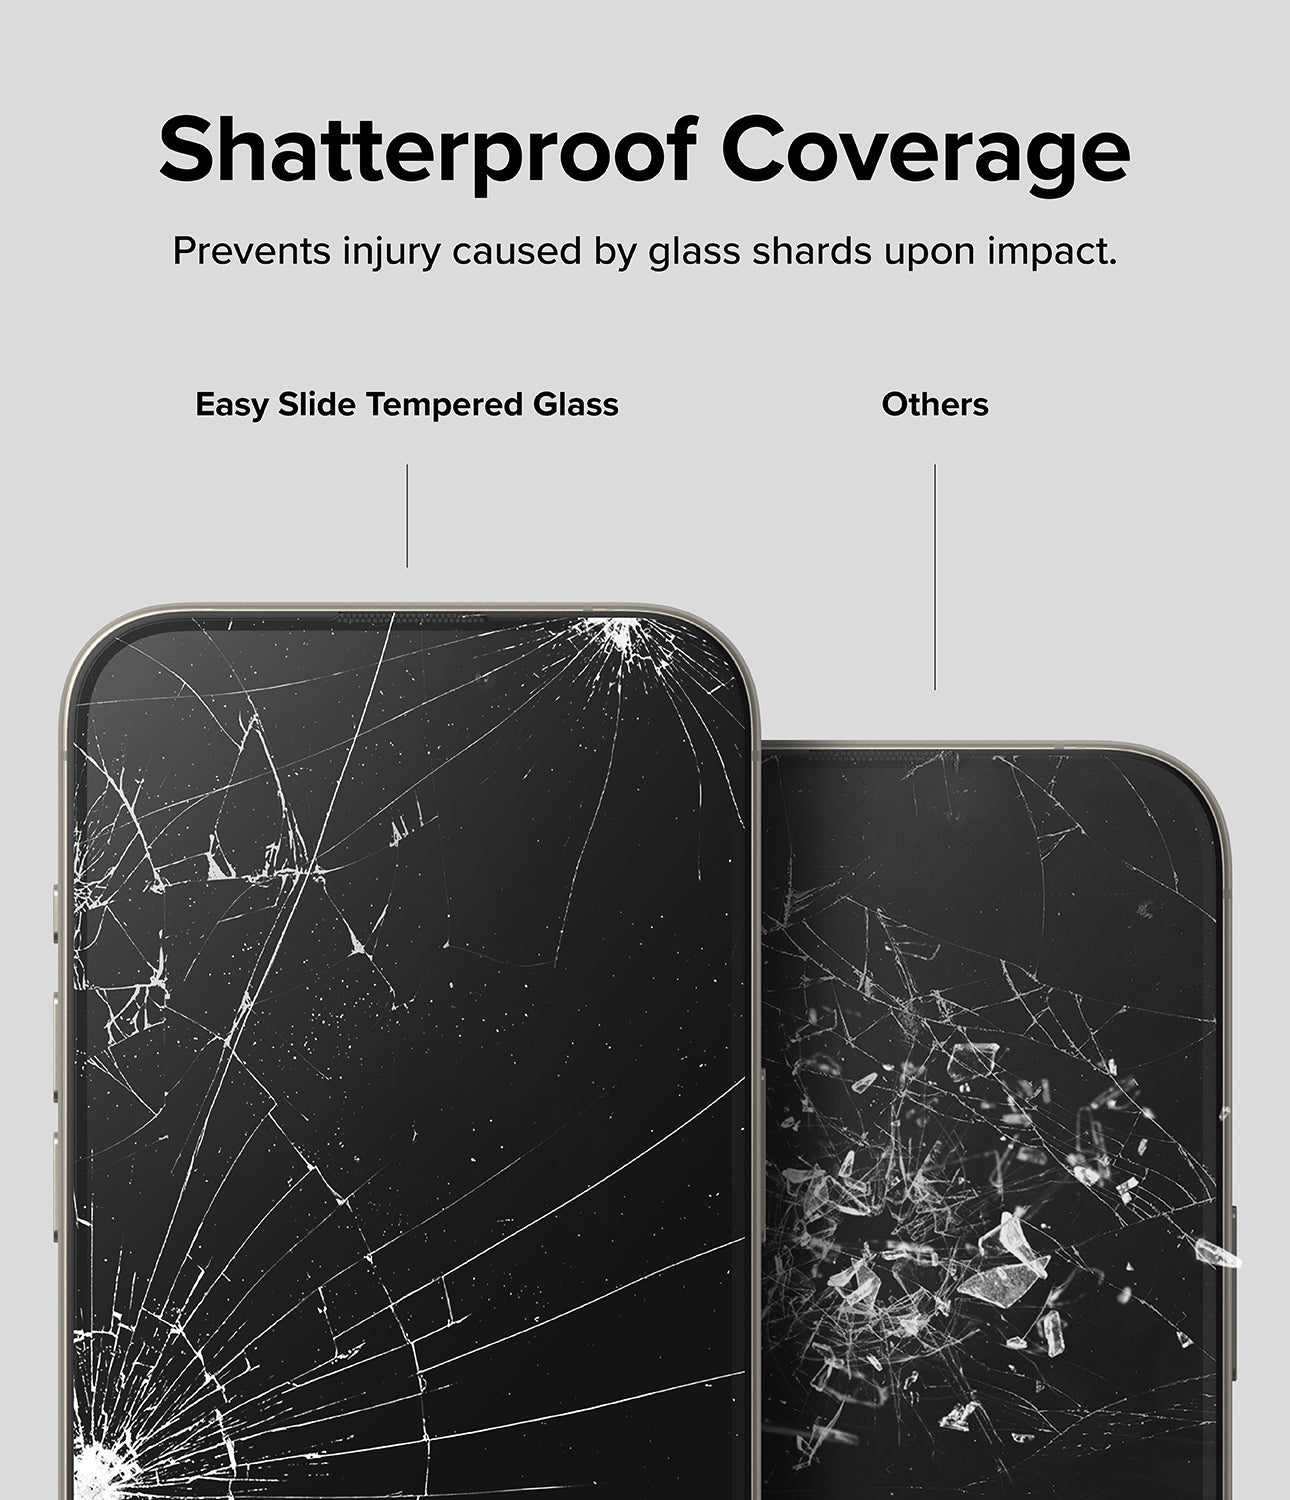 iPhone 15 Pro Screen Protector | Easy Slide Tempered Glass - Shatterproof Coverage. Prevents injury caused by glass shards upon impact.